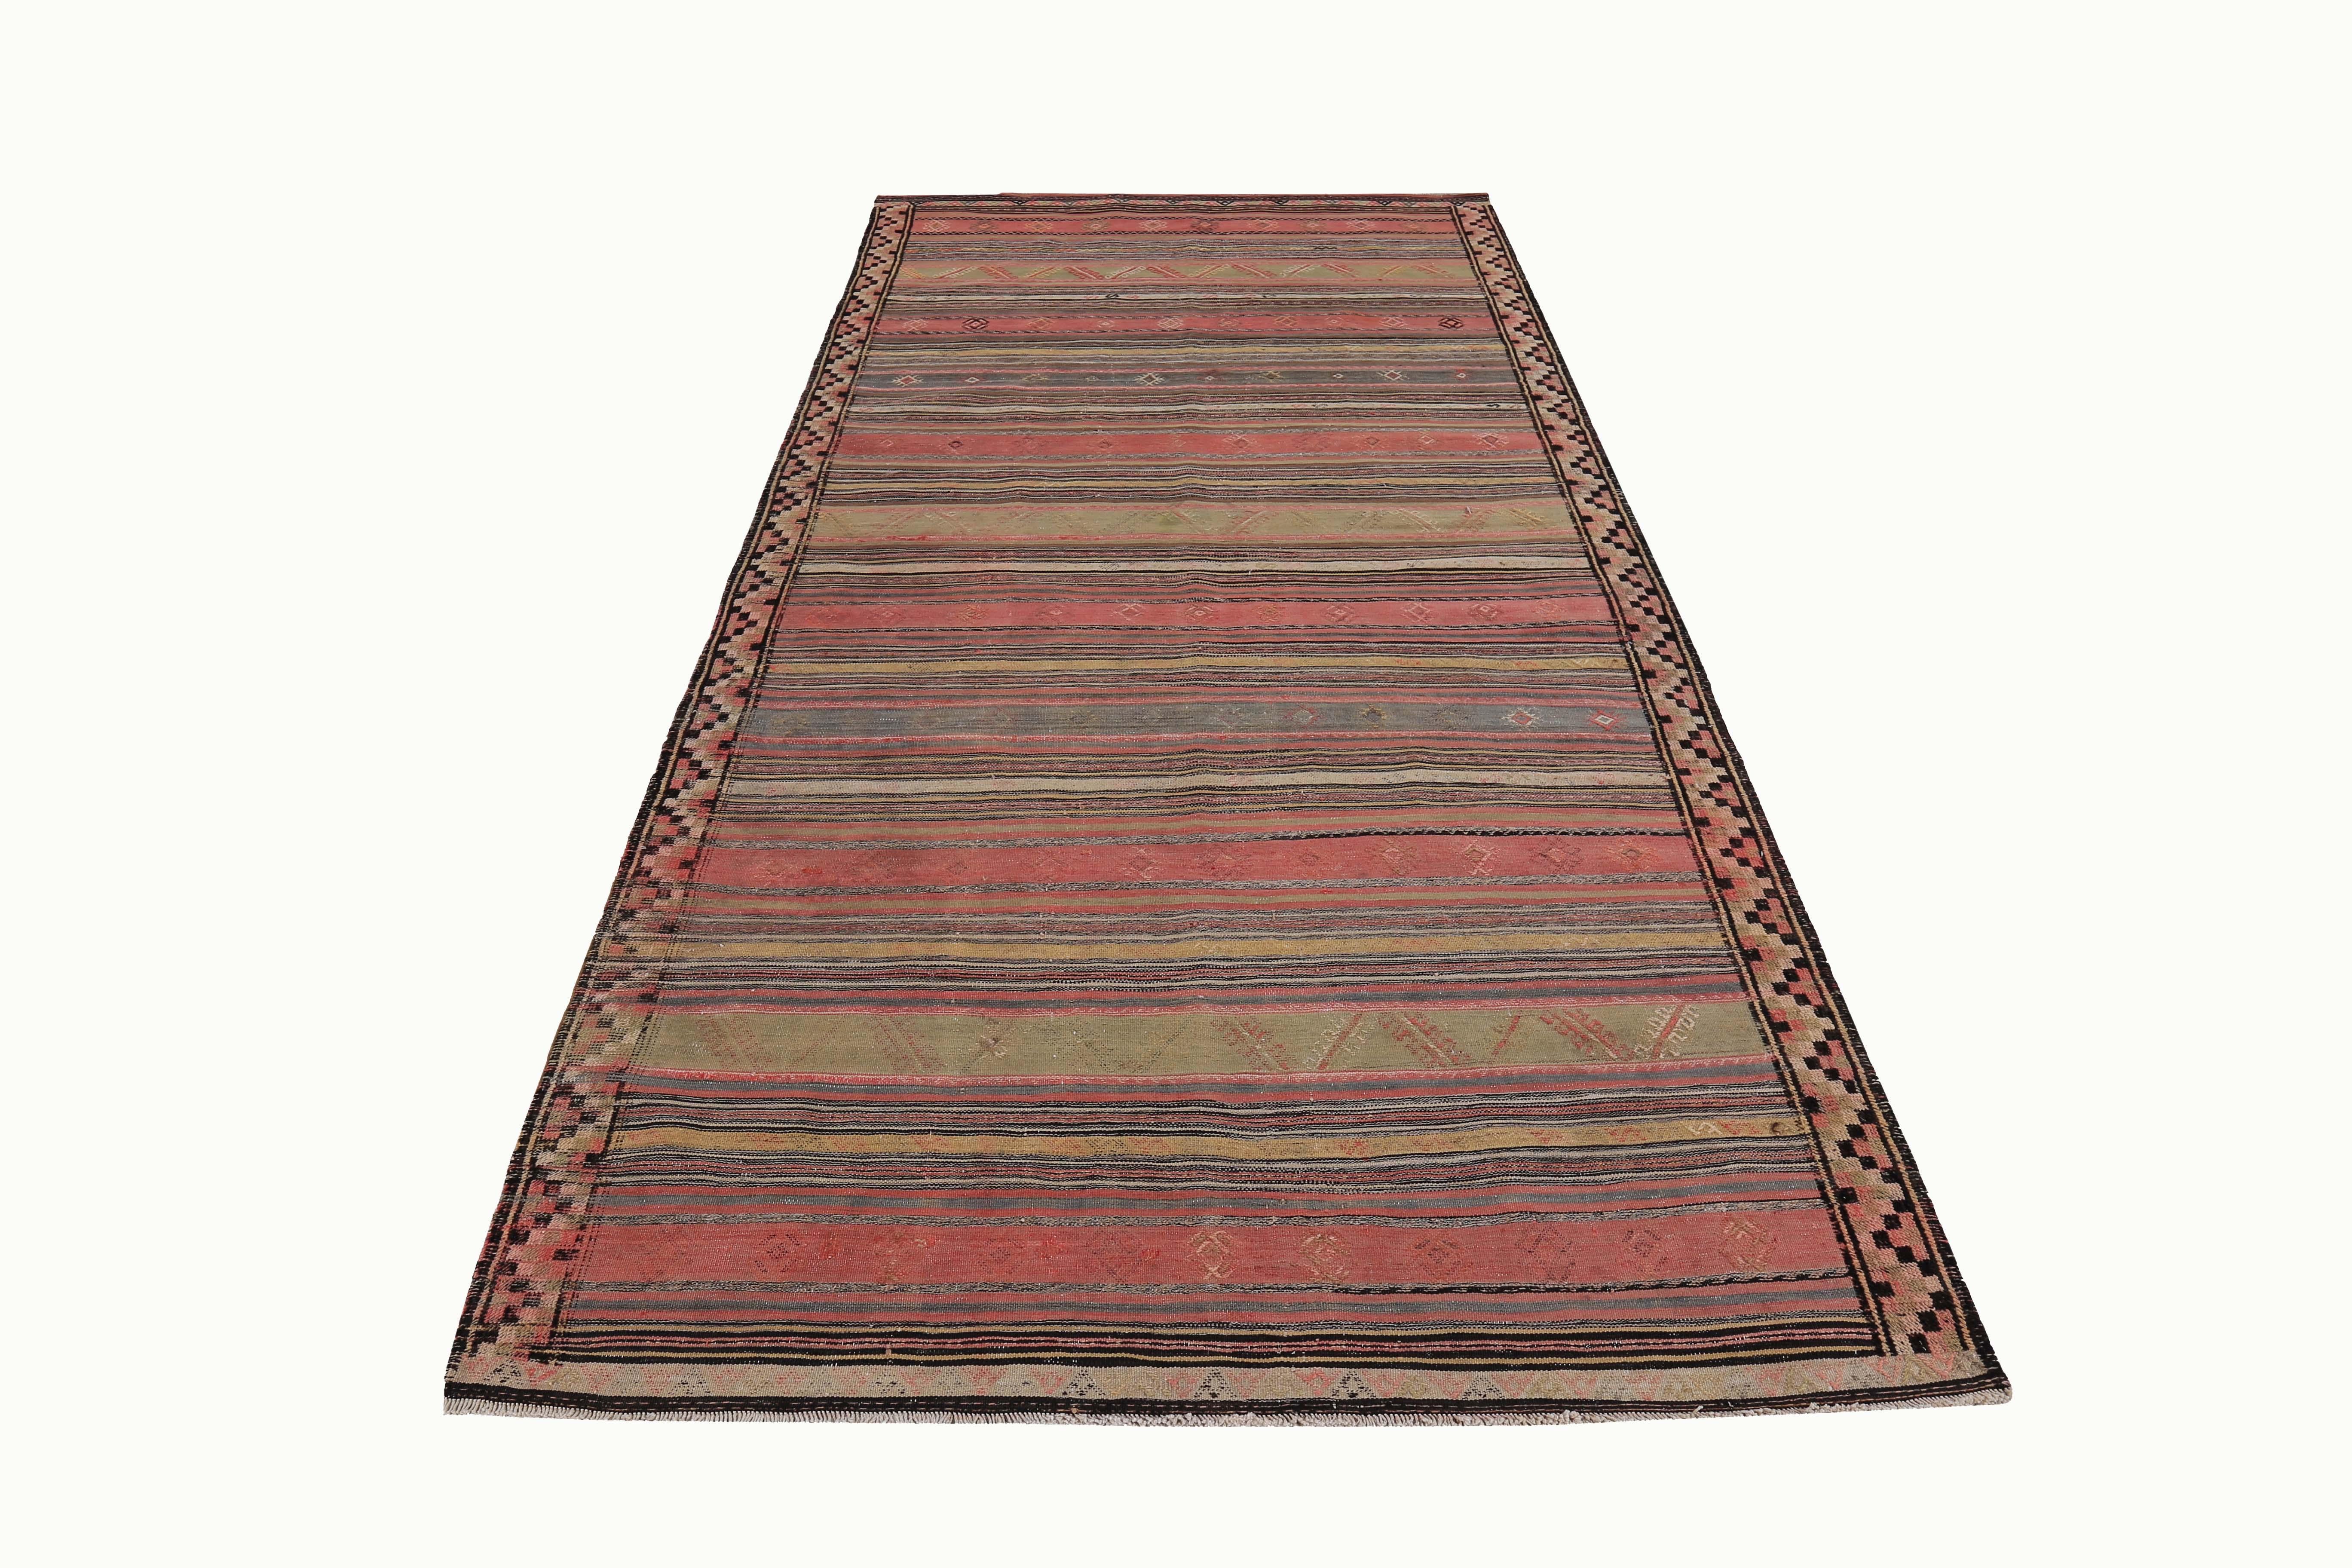 Turkish rug handwoven from the finest sheep’s wool and colored with all-natural vegetable dyes that are safe for humans and pets. It’s a traditional Kilim flat-weave design featuring red, green and yellow stripes. It’s a stunning piece to get for